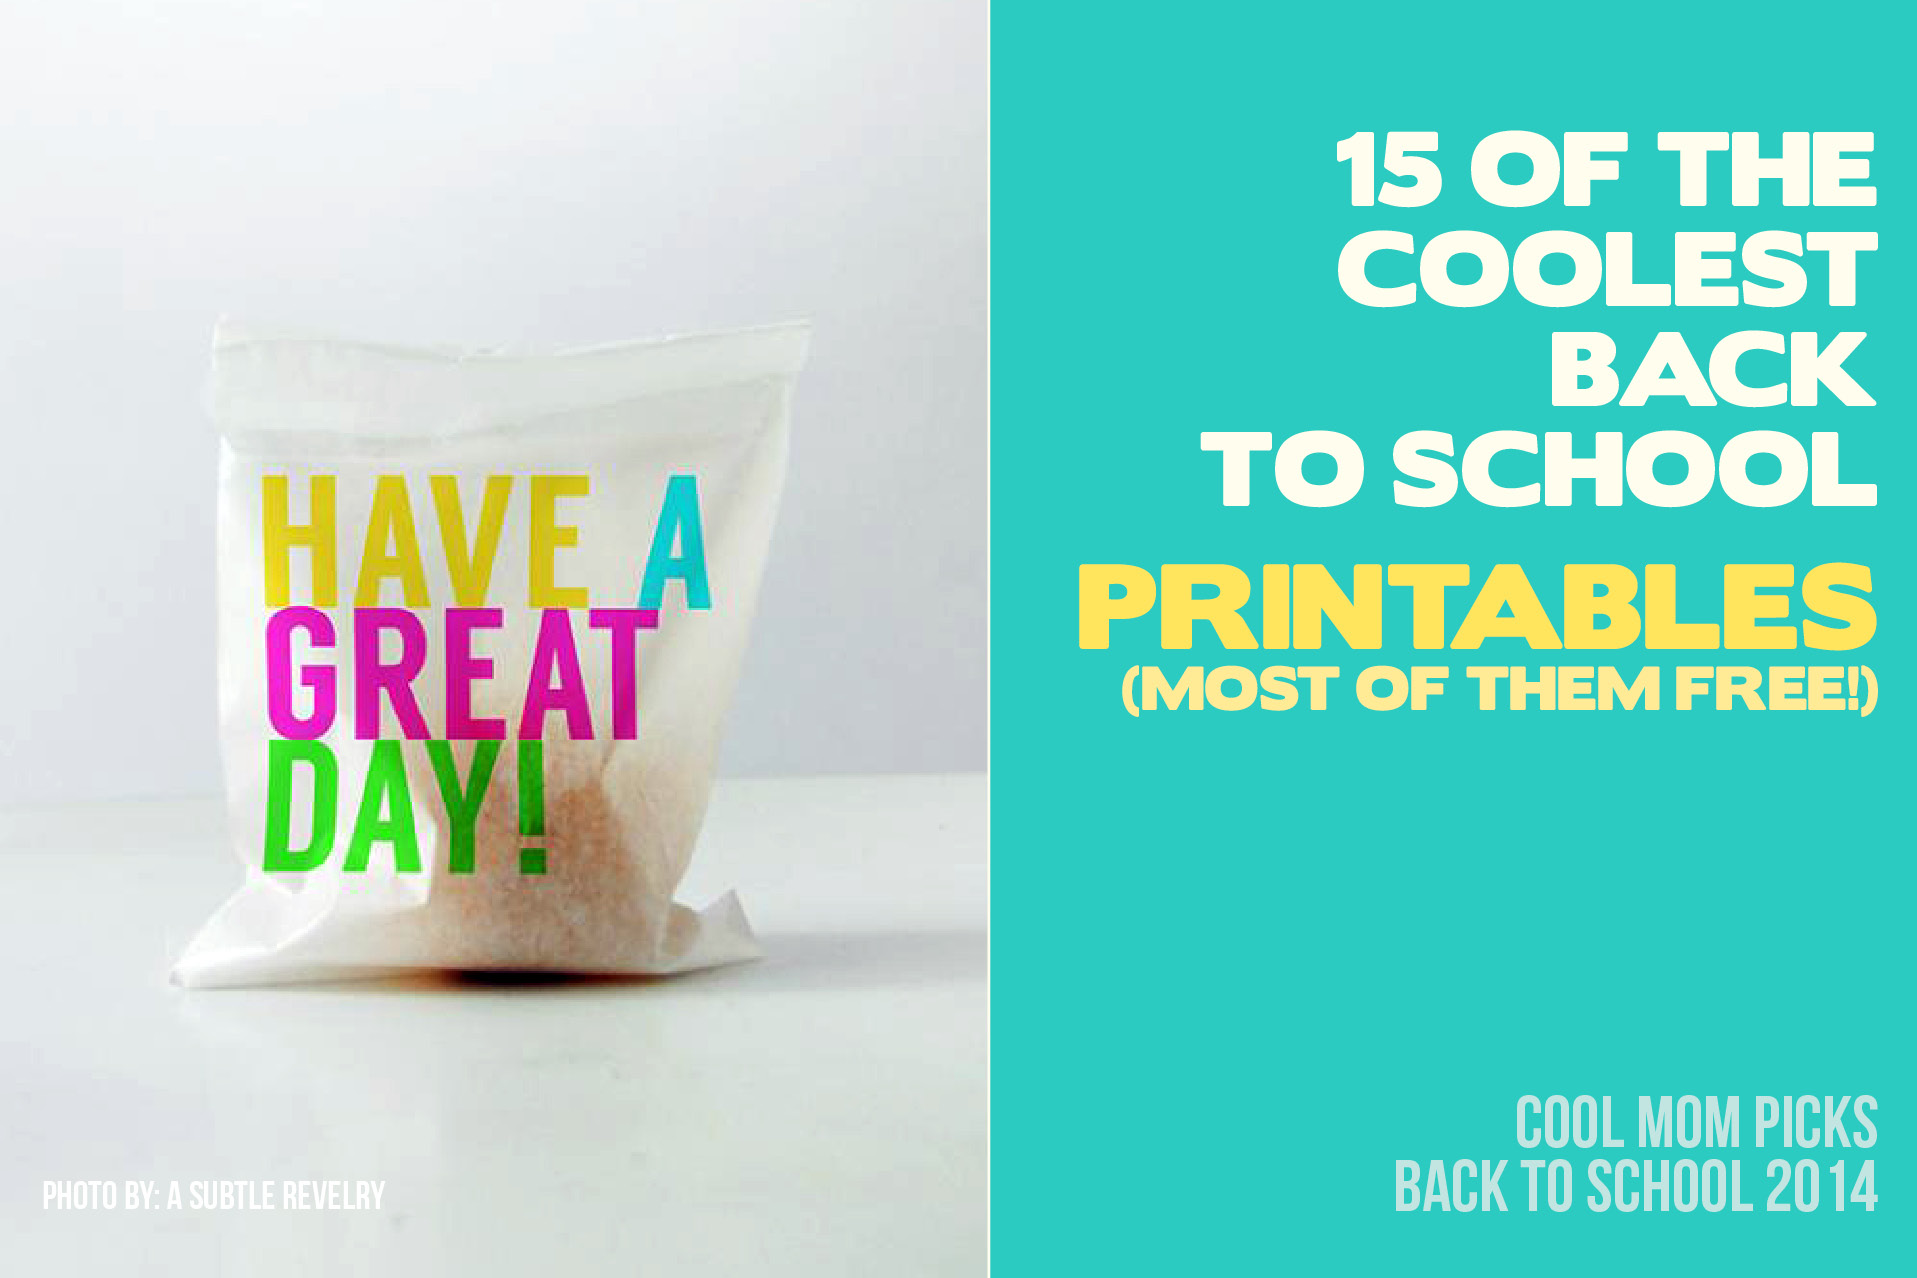 15 of the coolest back to school printables: Back to School Guide 2014